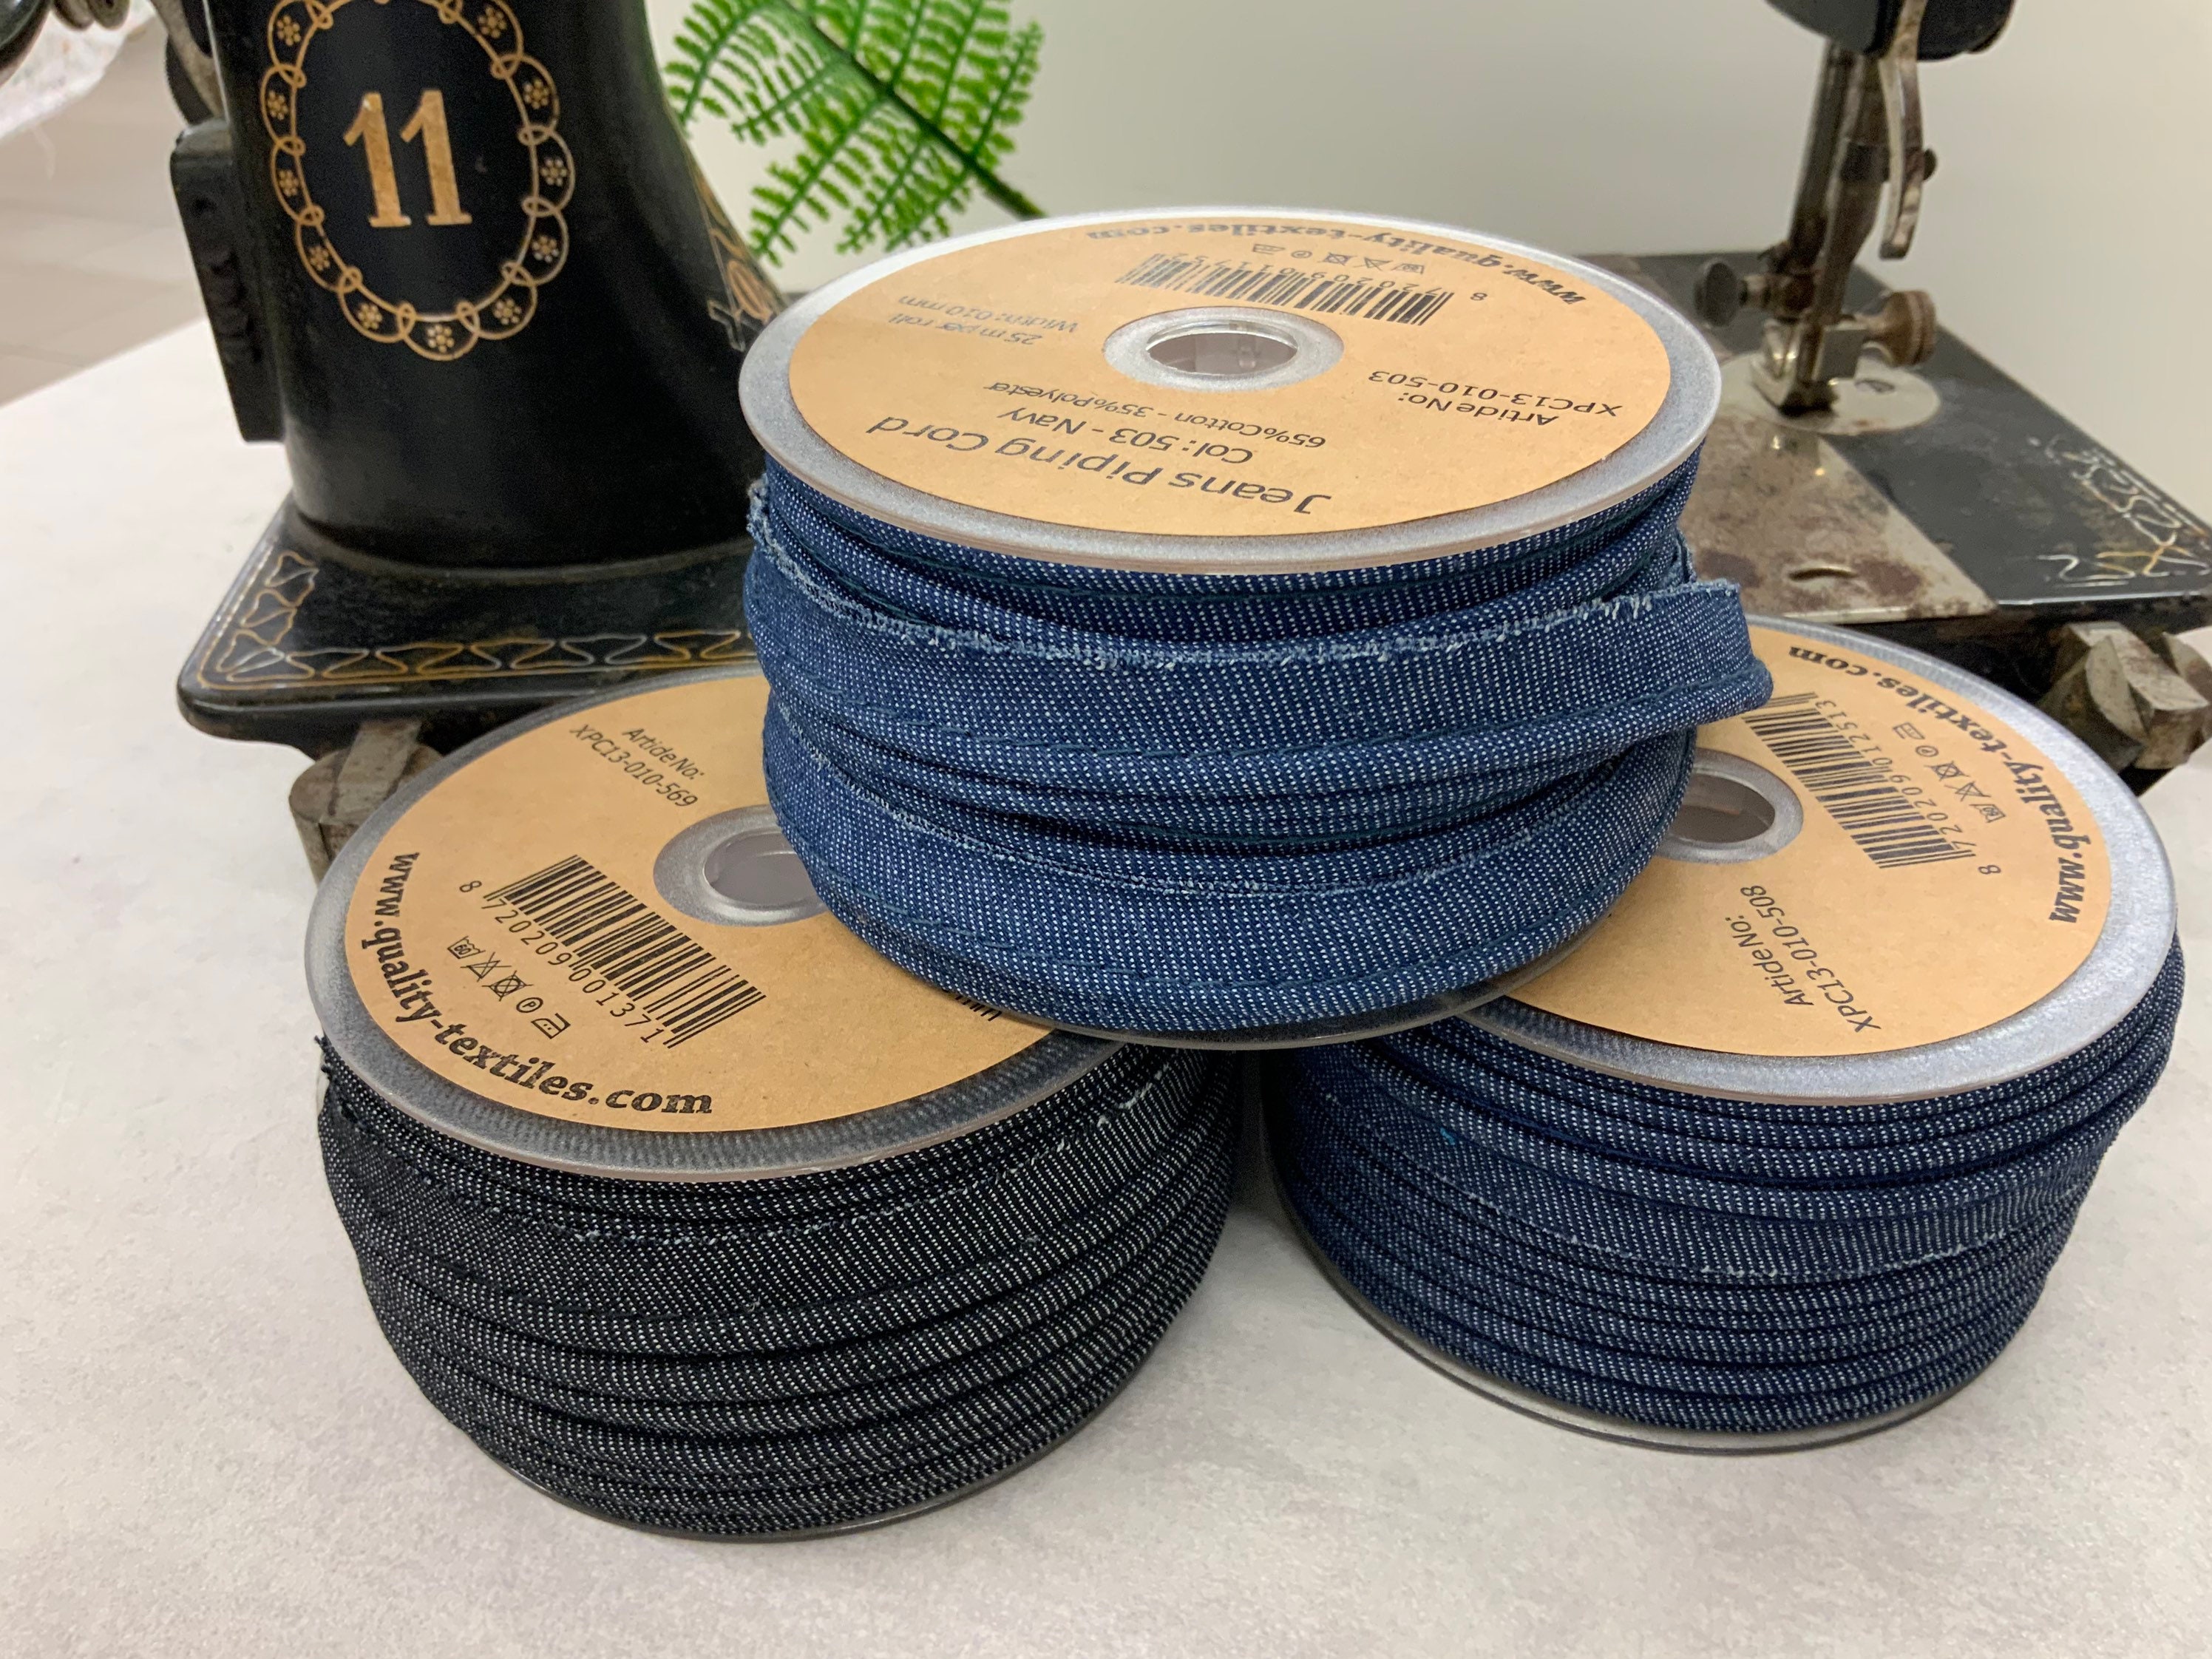 Jeans Piping Tape 3 Colors Piping or a Piping Tape Jeans, Denim